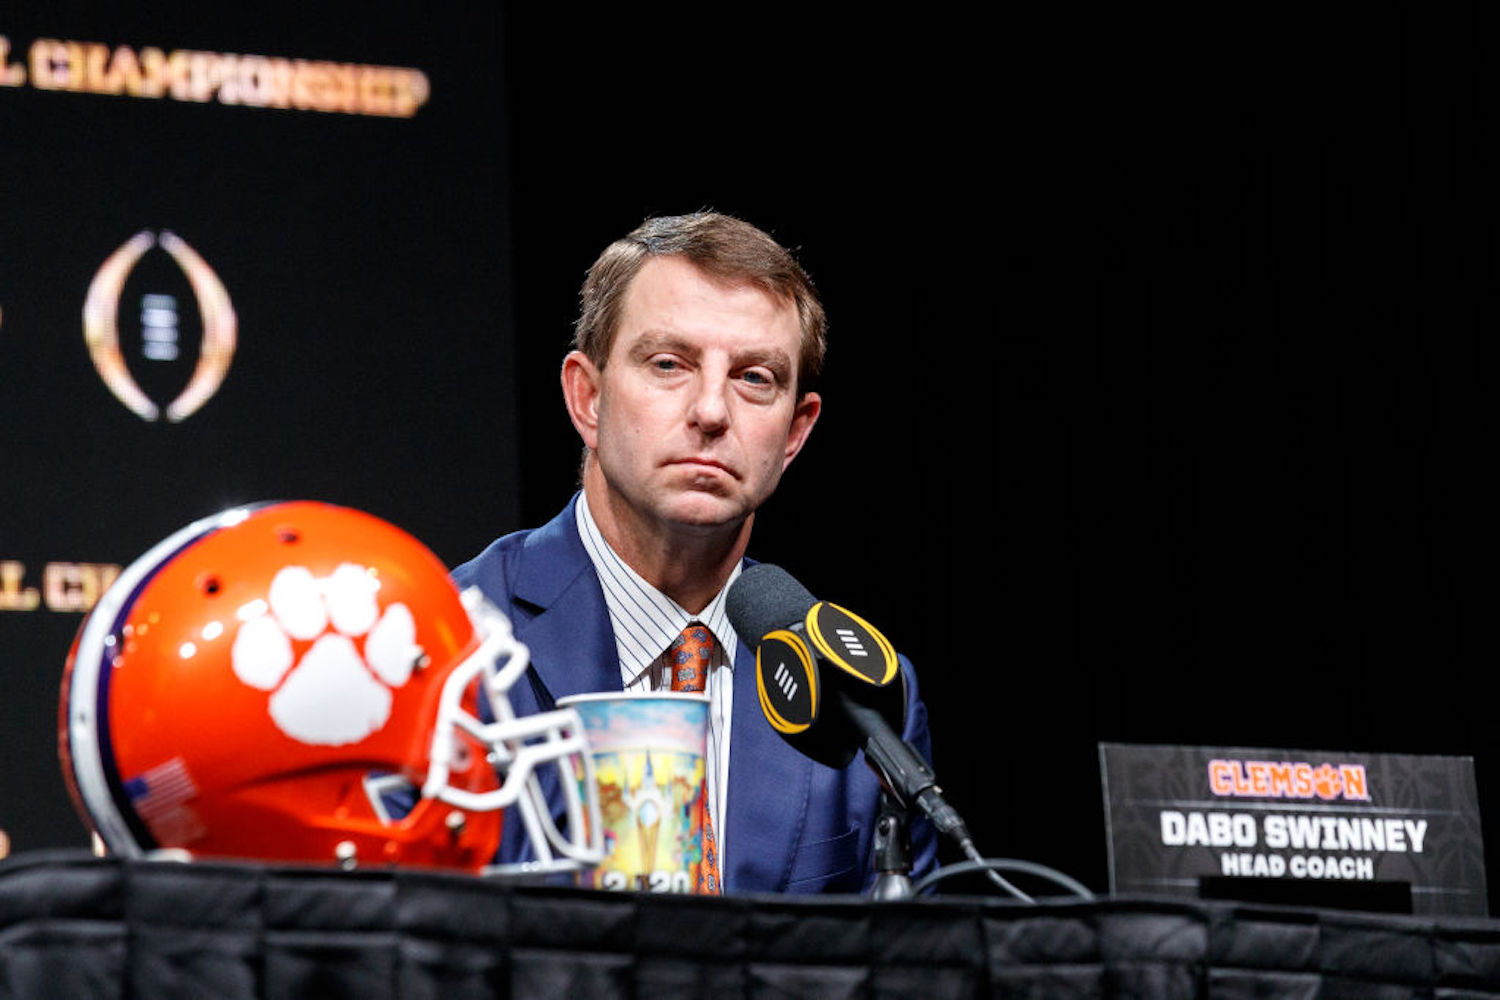 Dabo Swinney and Clemson’s Championship Hopes Just Took a Huge Hit